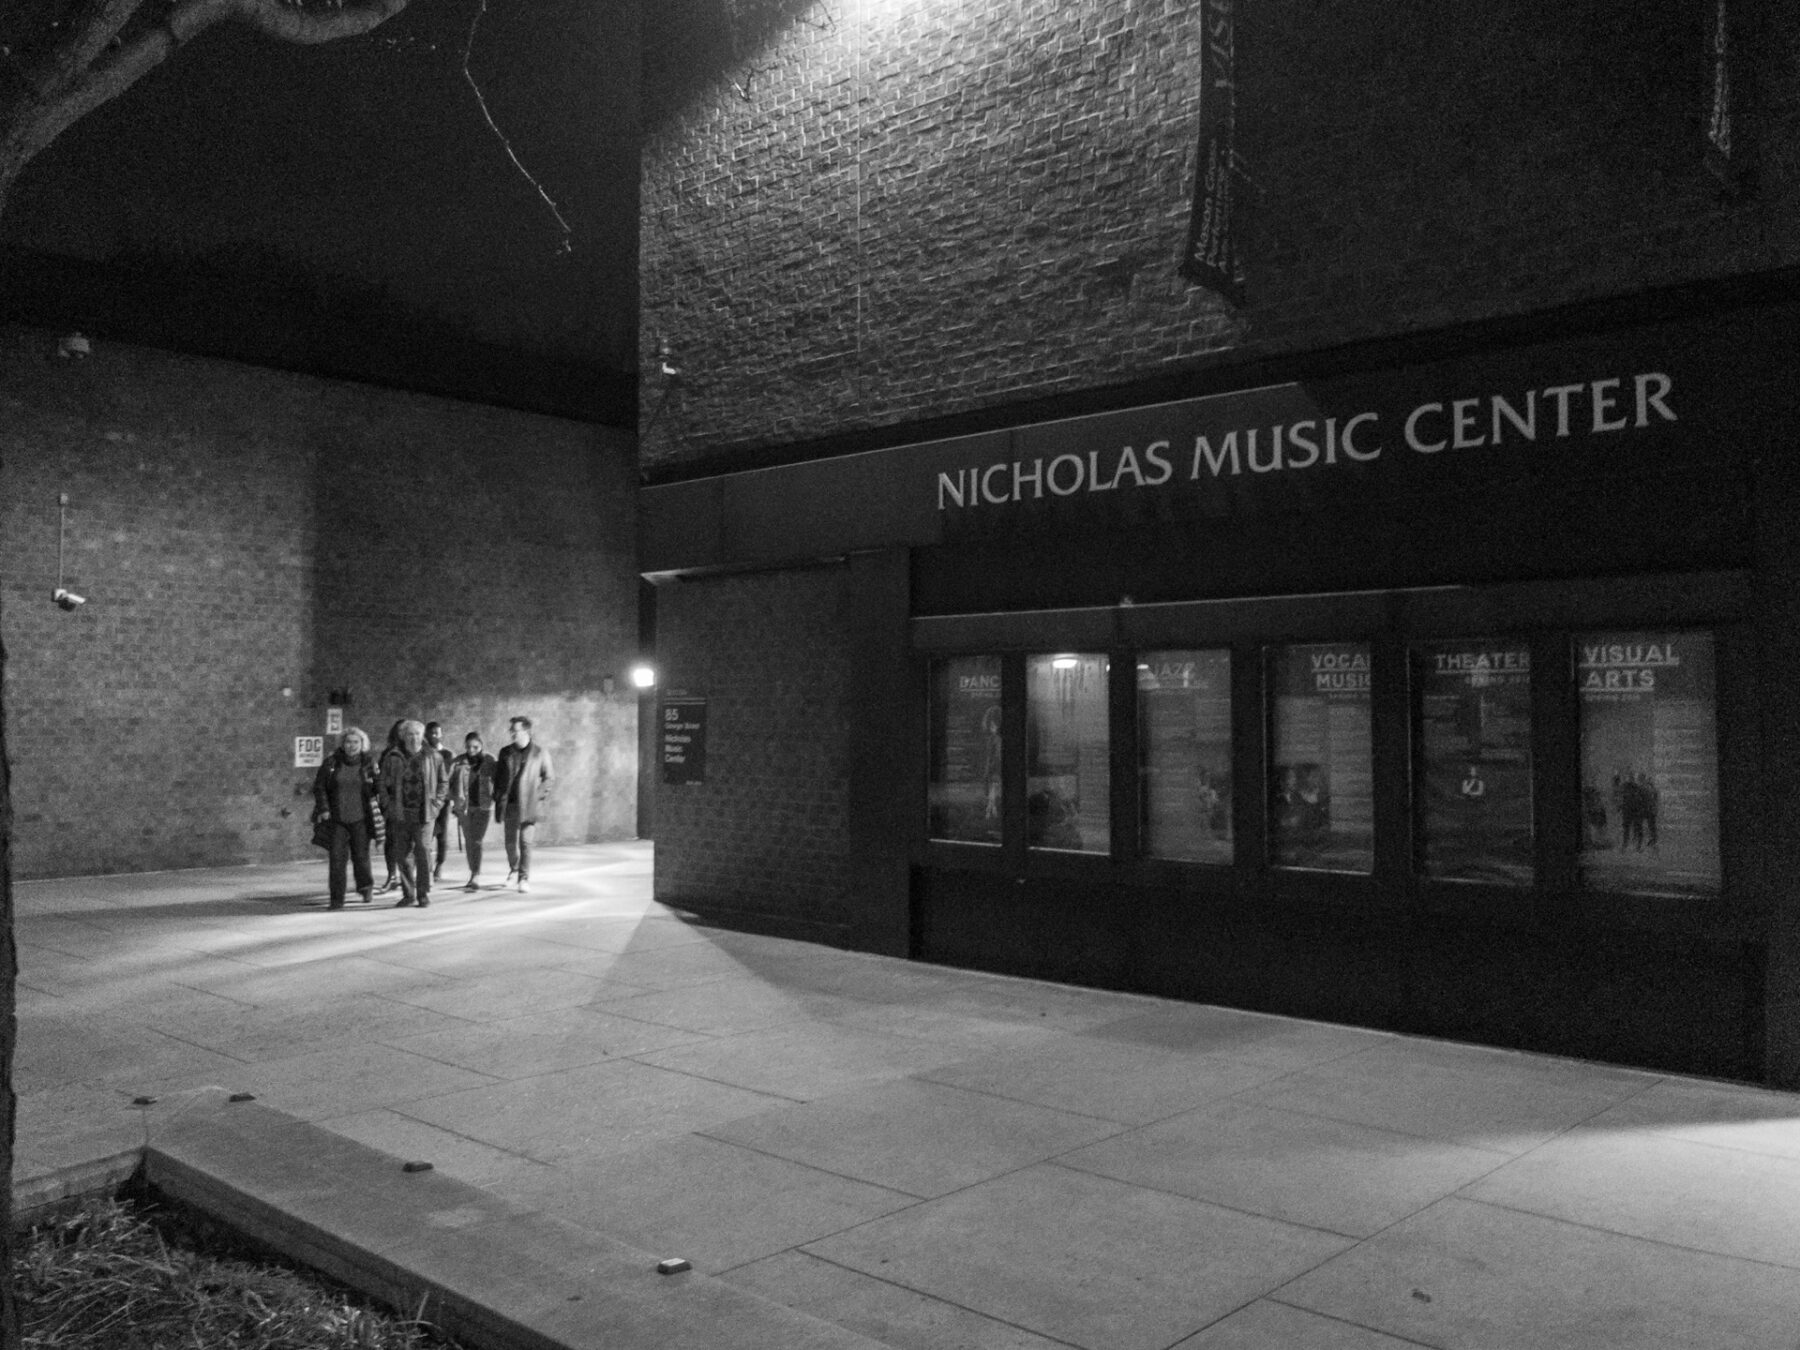 Checked in at Nicholas Music Center